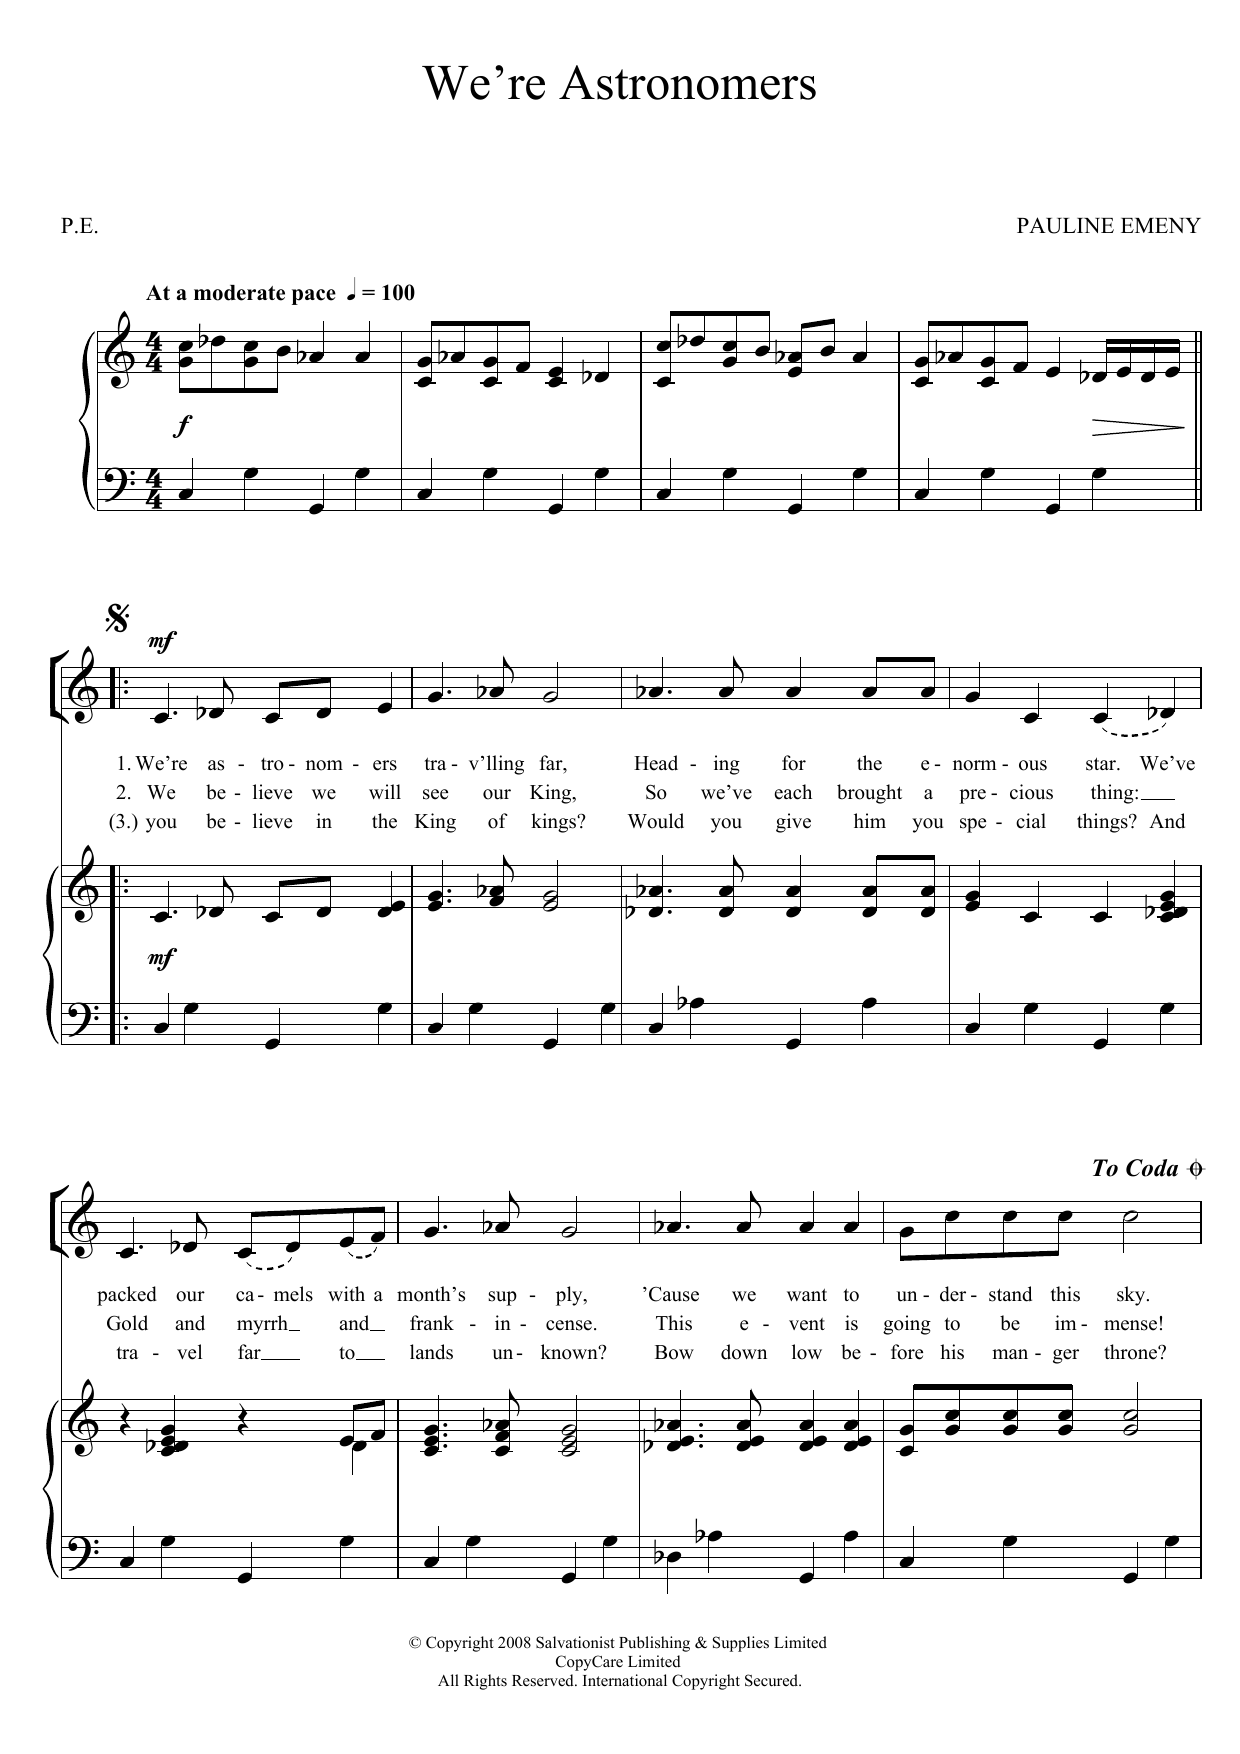 Download The Salvation Army We're Astronomers Sheet Music